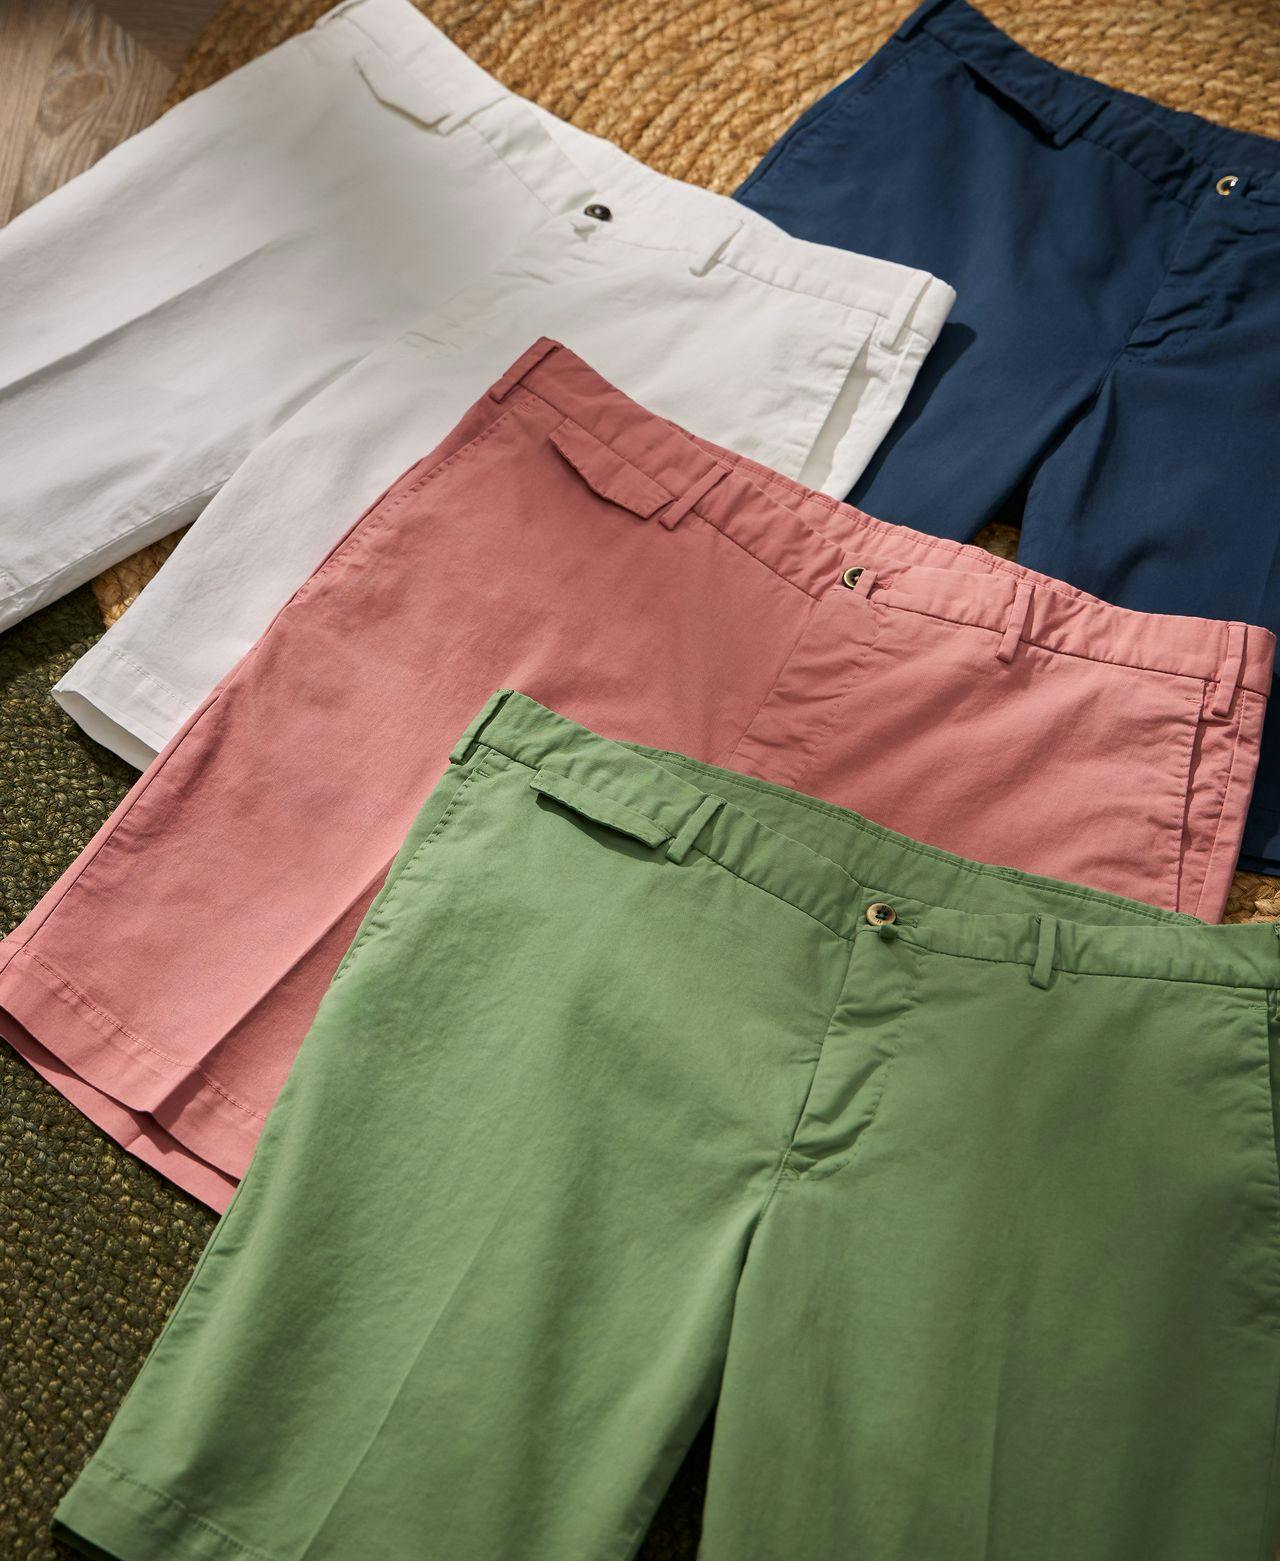 four different coloured shorts displayed on carpet